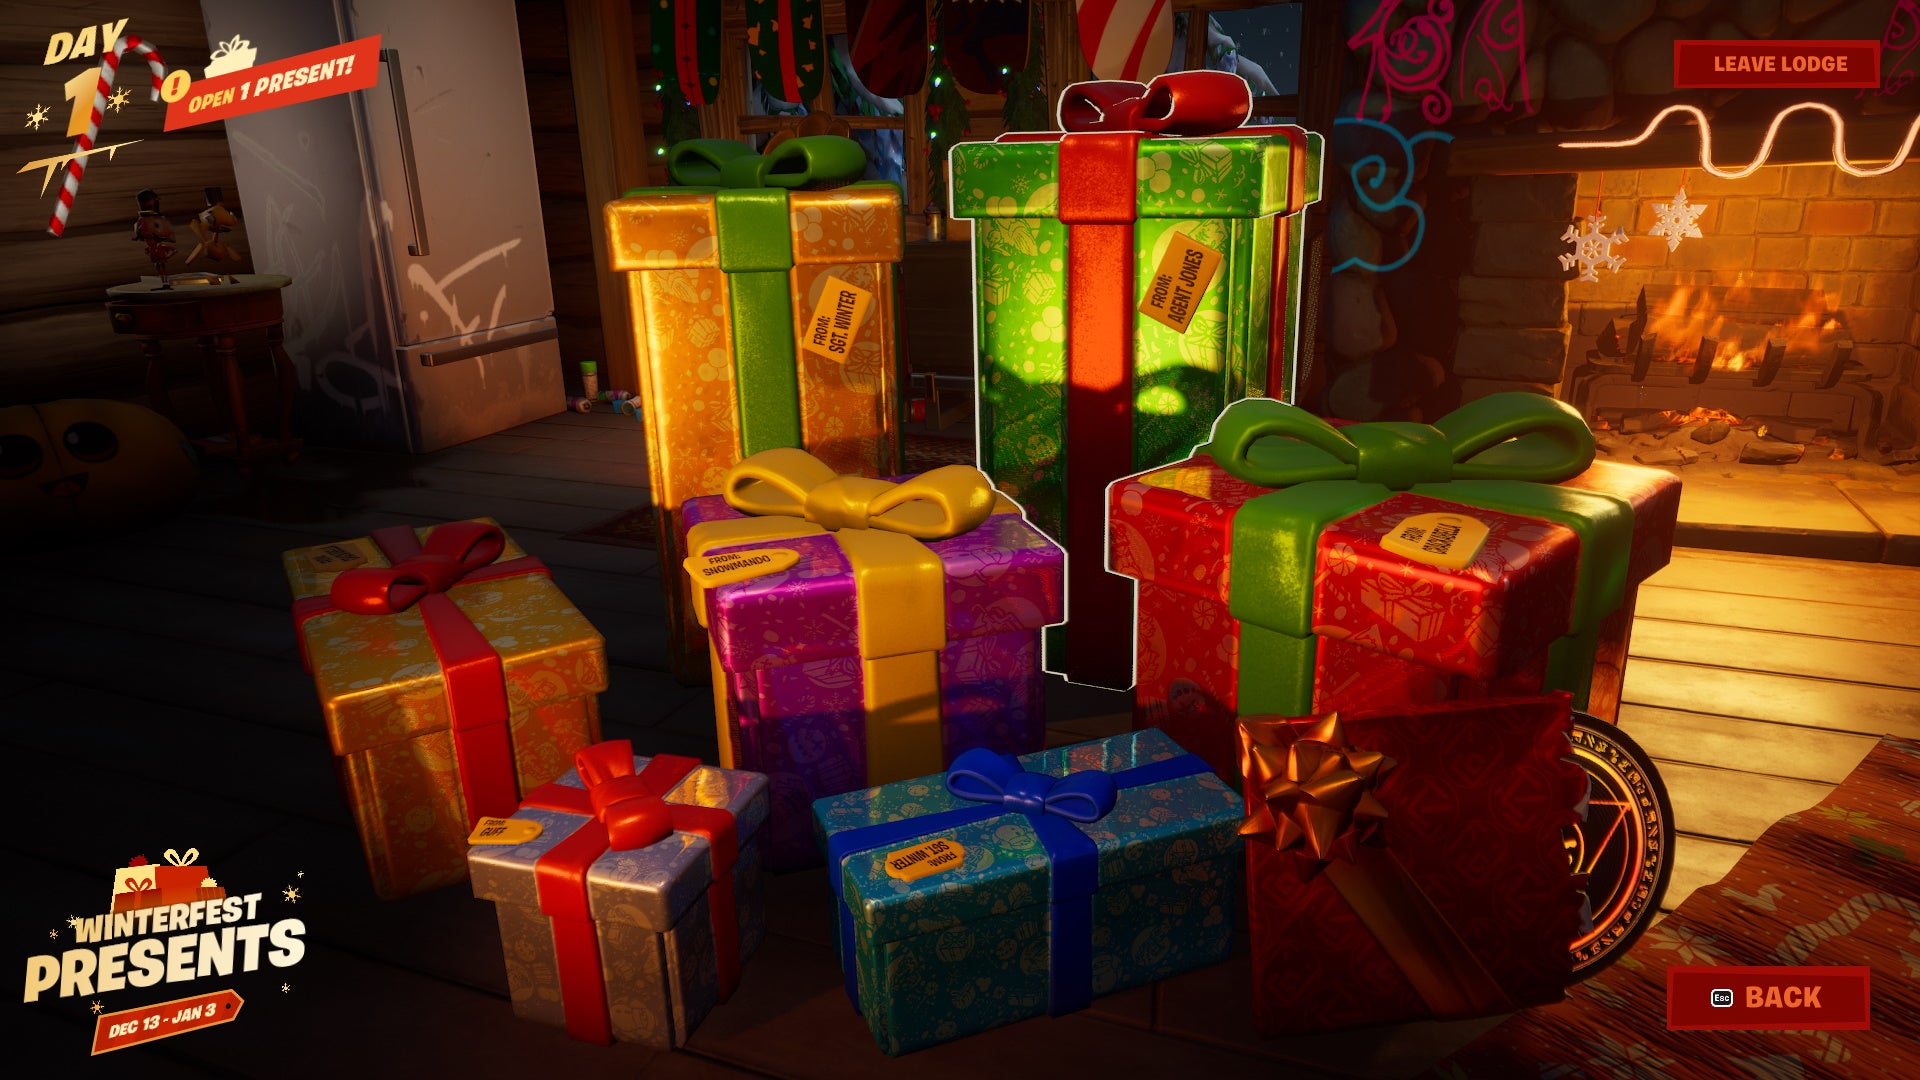 Fortnite Winterfest 2022 presents: Eight boxes wrapped in red, gold, and green paper are illuminated by a nearby fireplace.